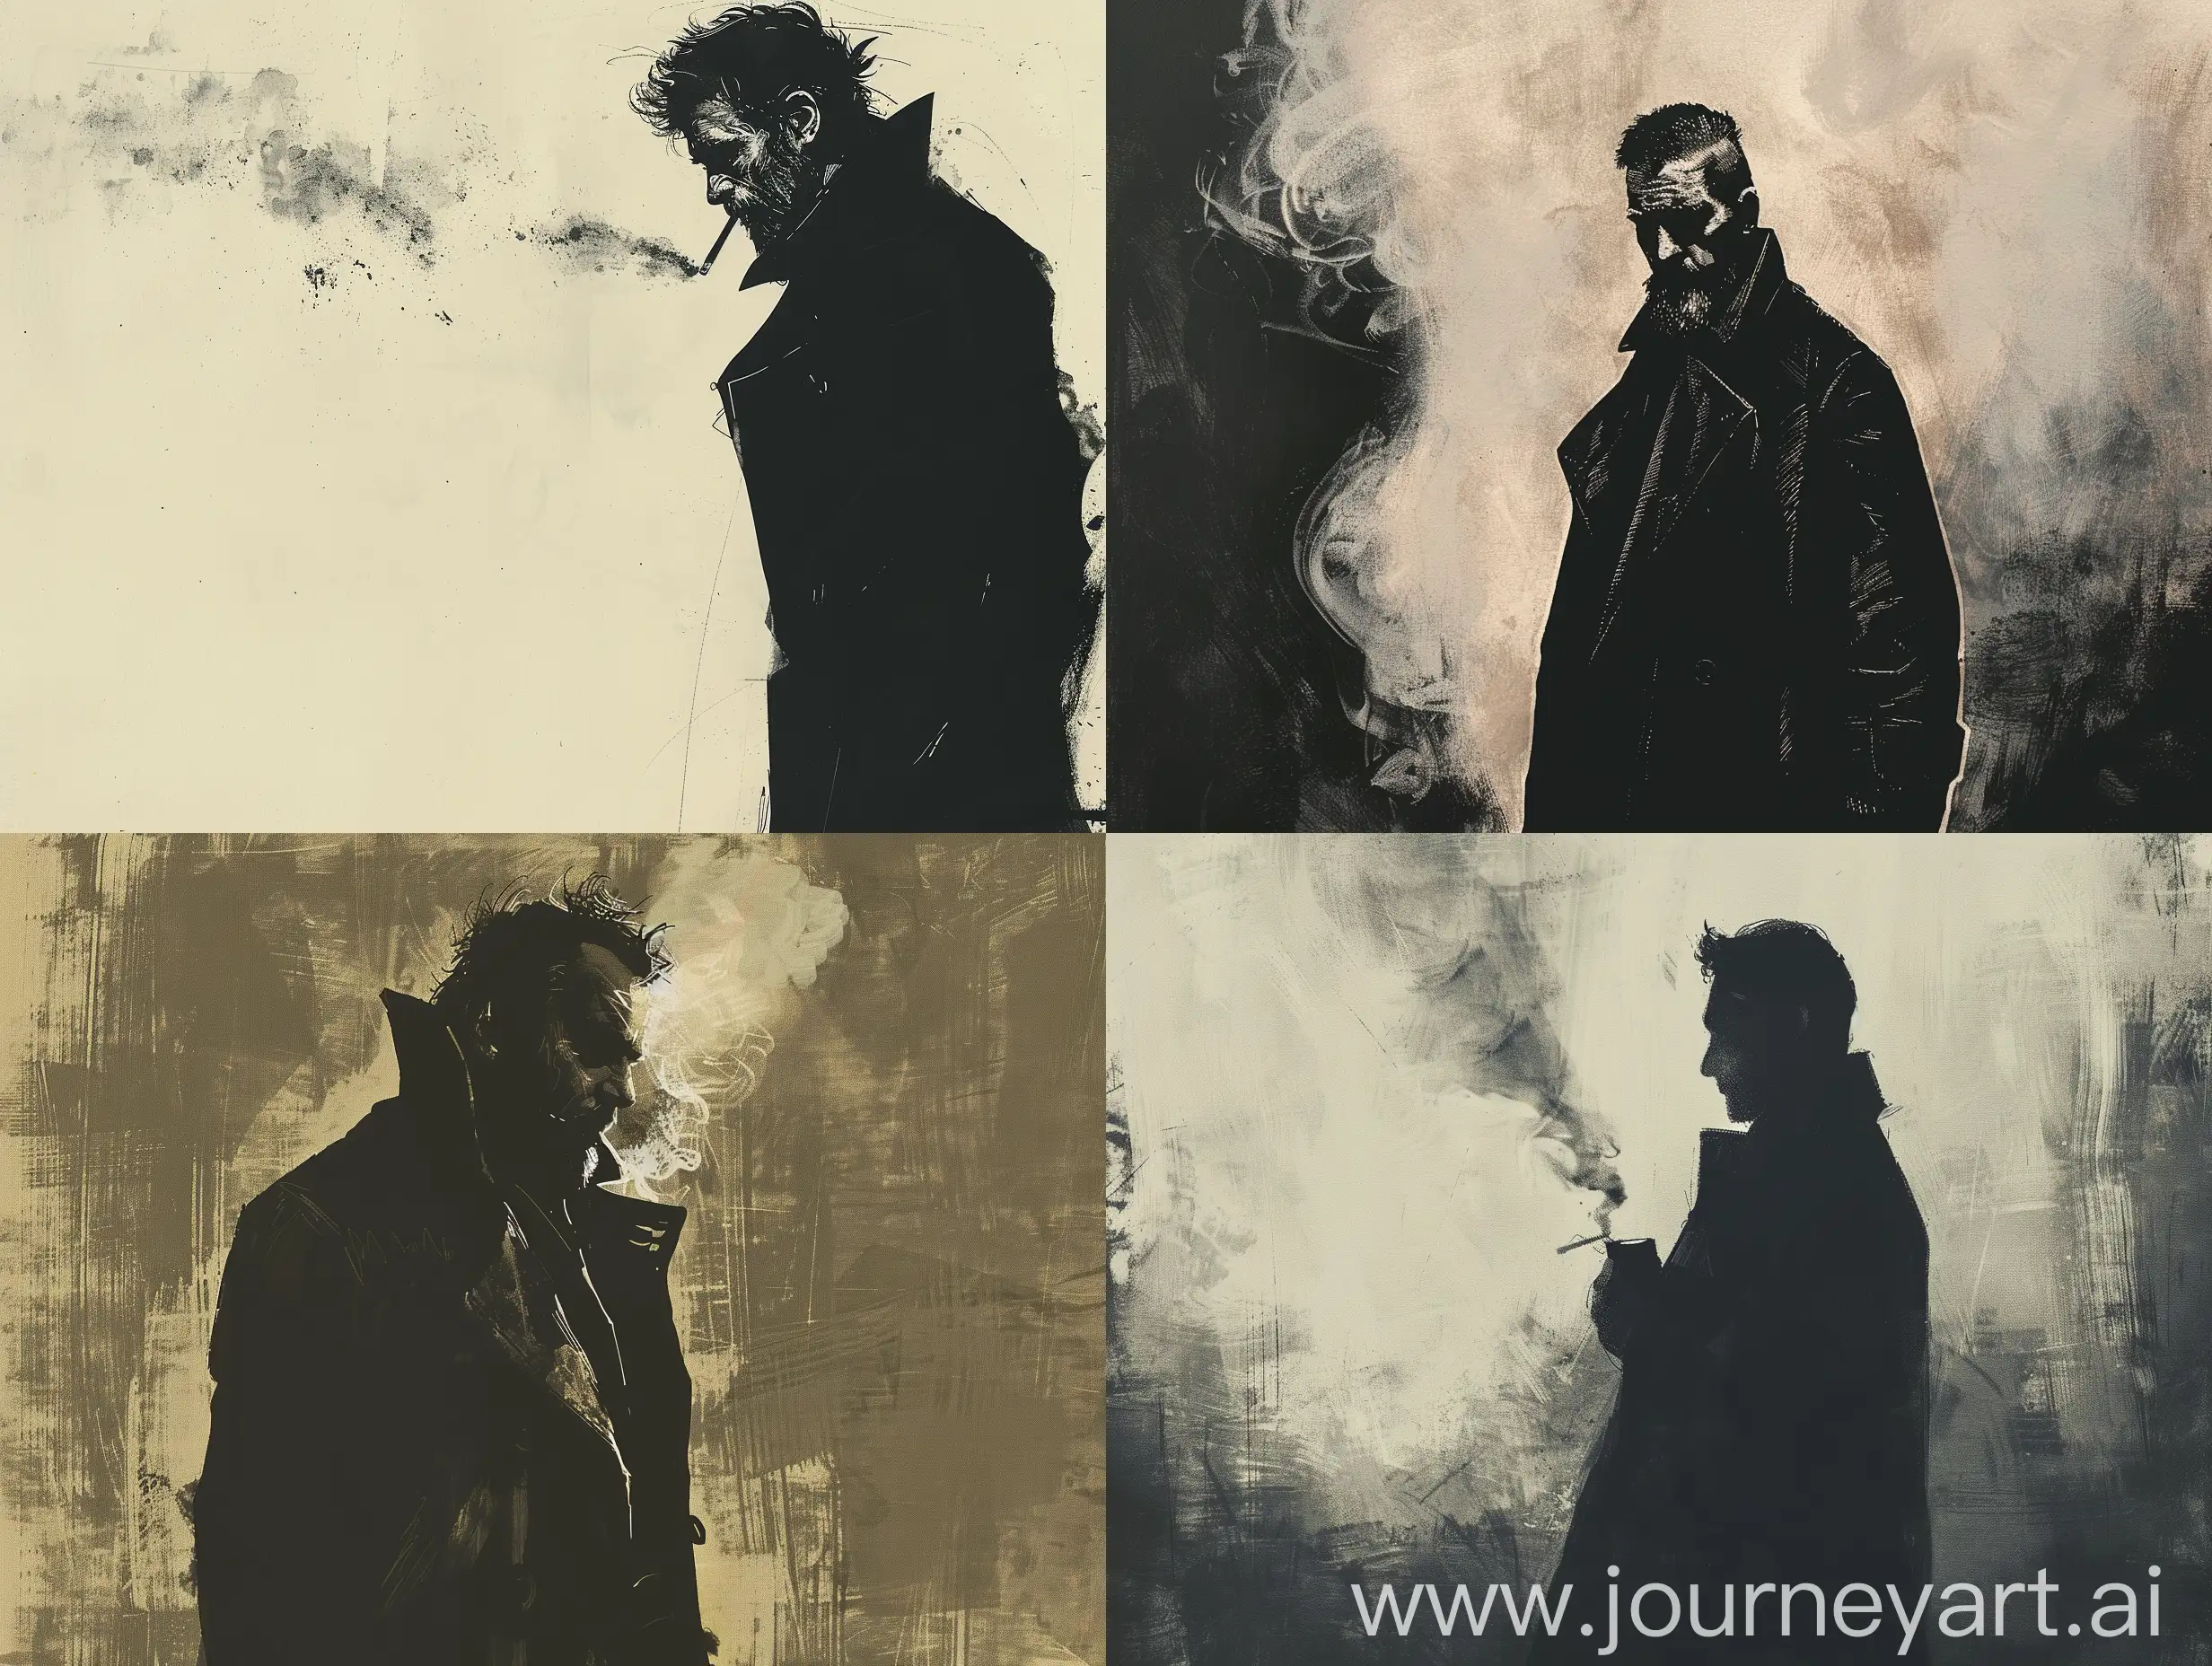 a middle aged man with lon ghair and short beard wearing a black trenchcaot standing in the shadow ally smoking, minimalist concept art, etching